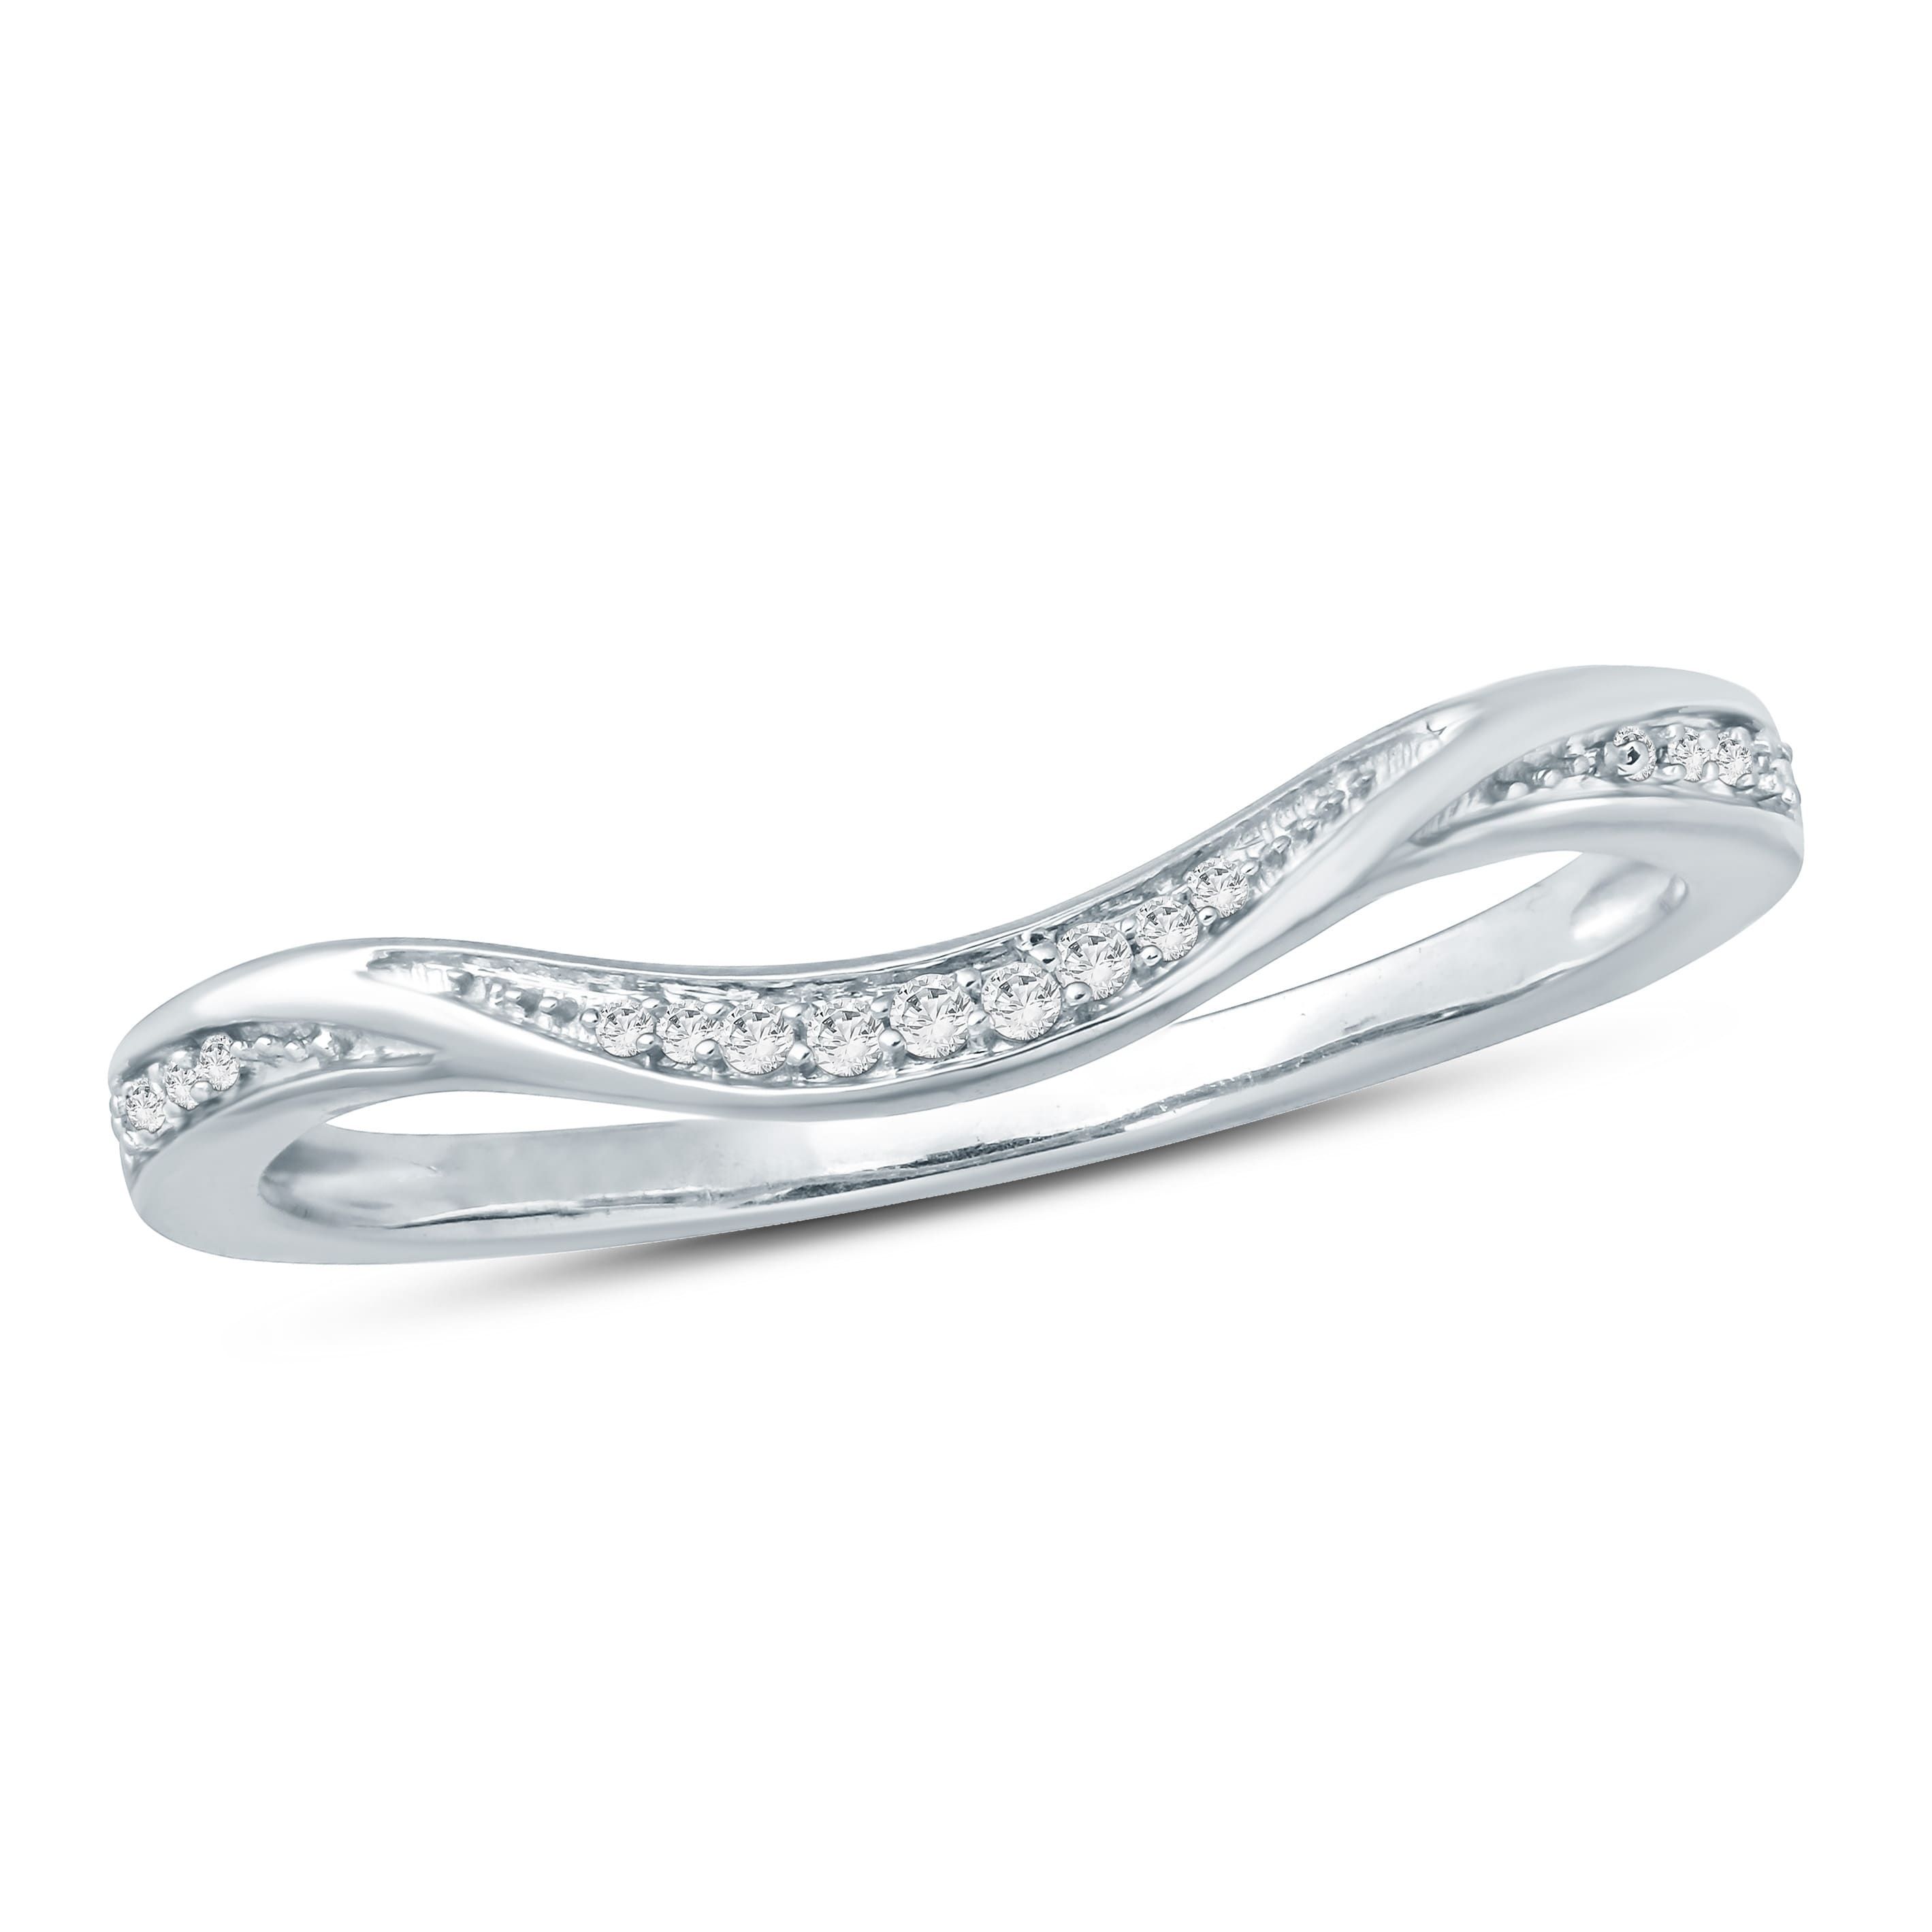 Cali Trove 1/20 Ct Round Diamond Anniversary Band In Sterling Silver Within Newest Diamond Anniversary Bands In Sterling Silver (View 11 of 15)